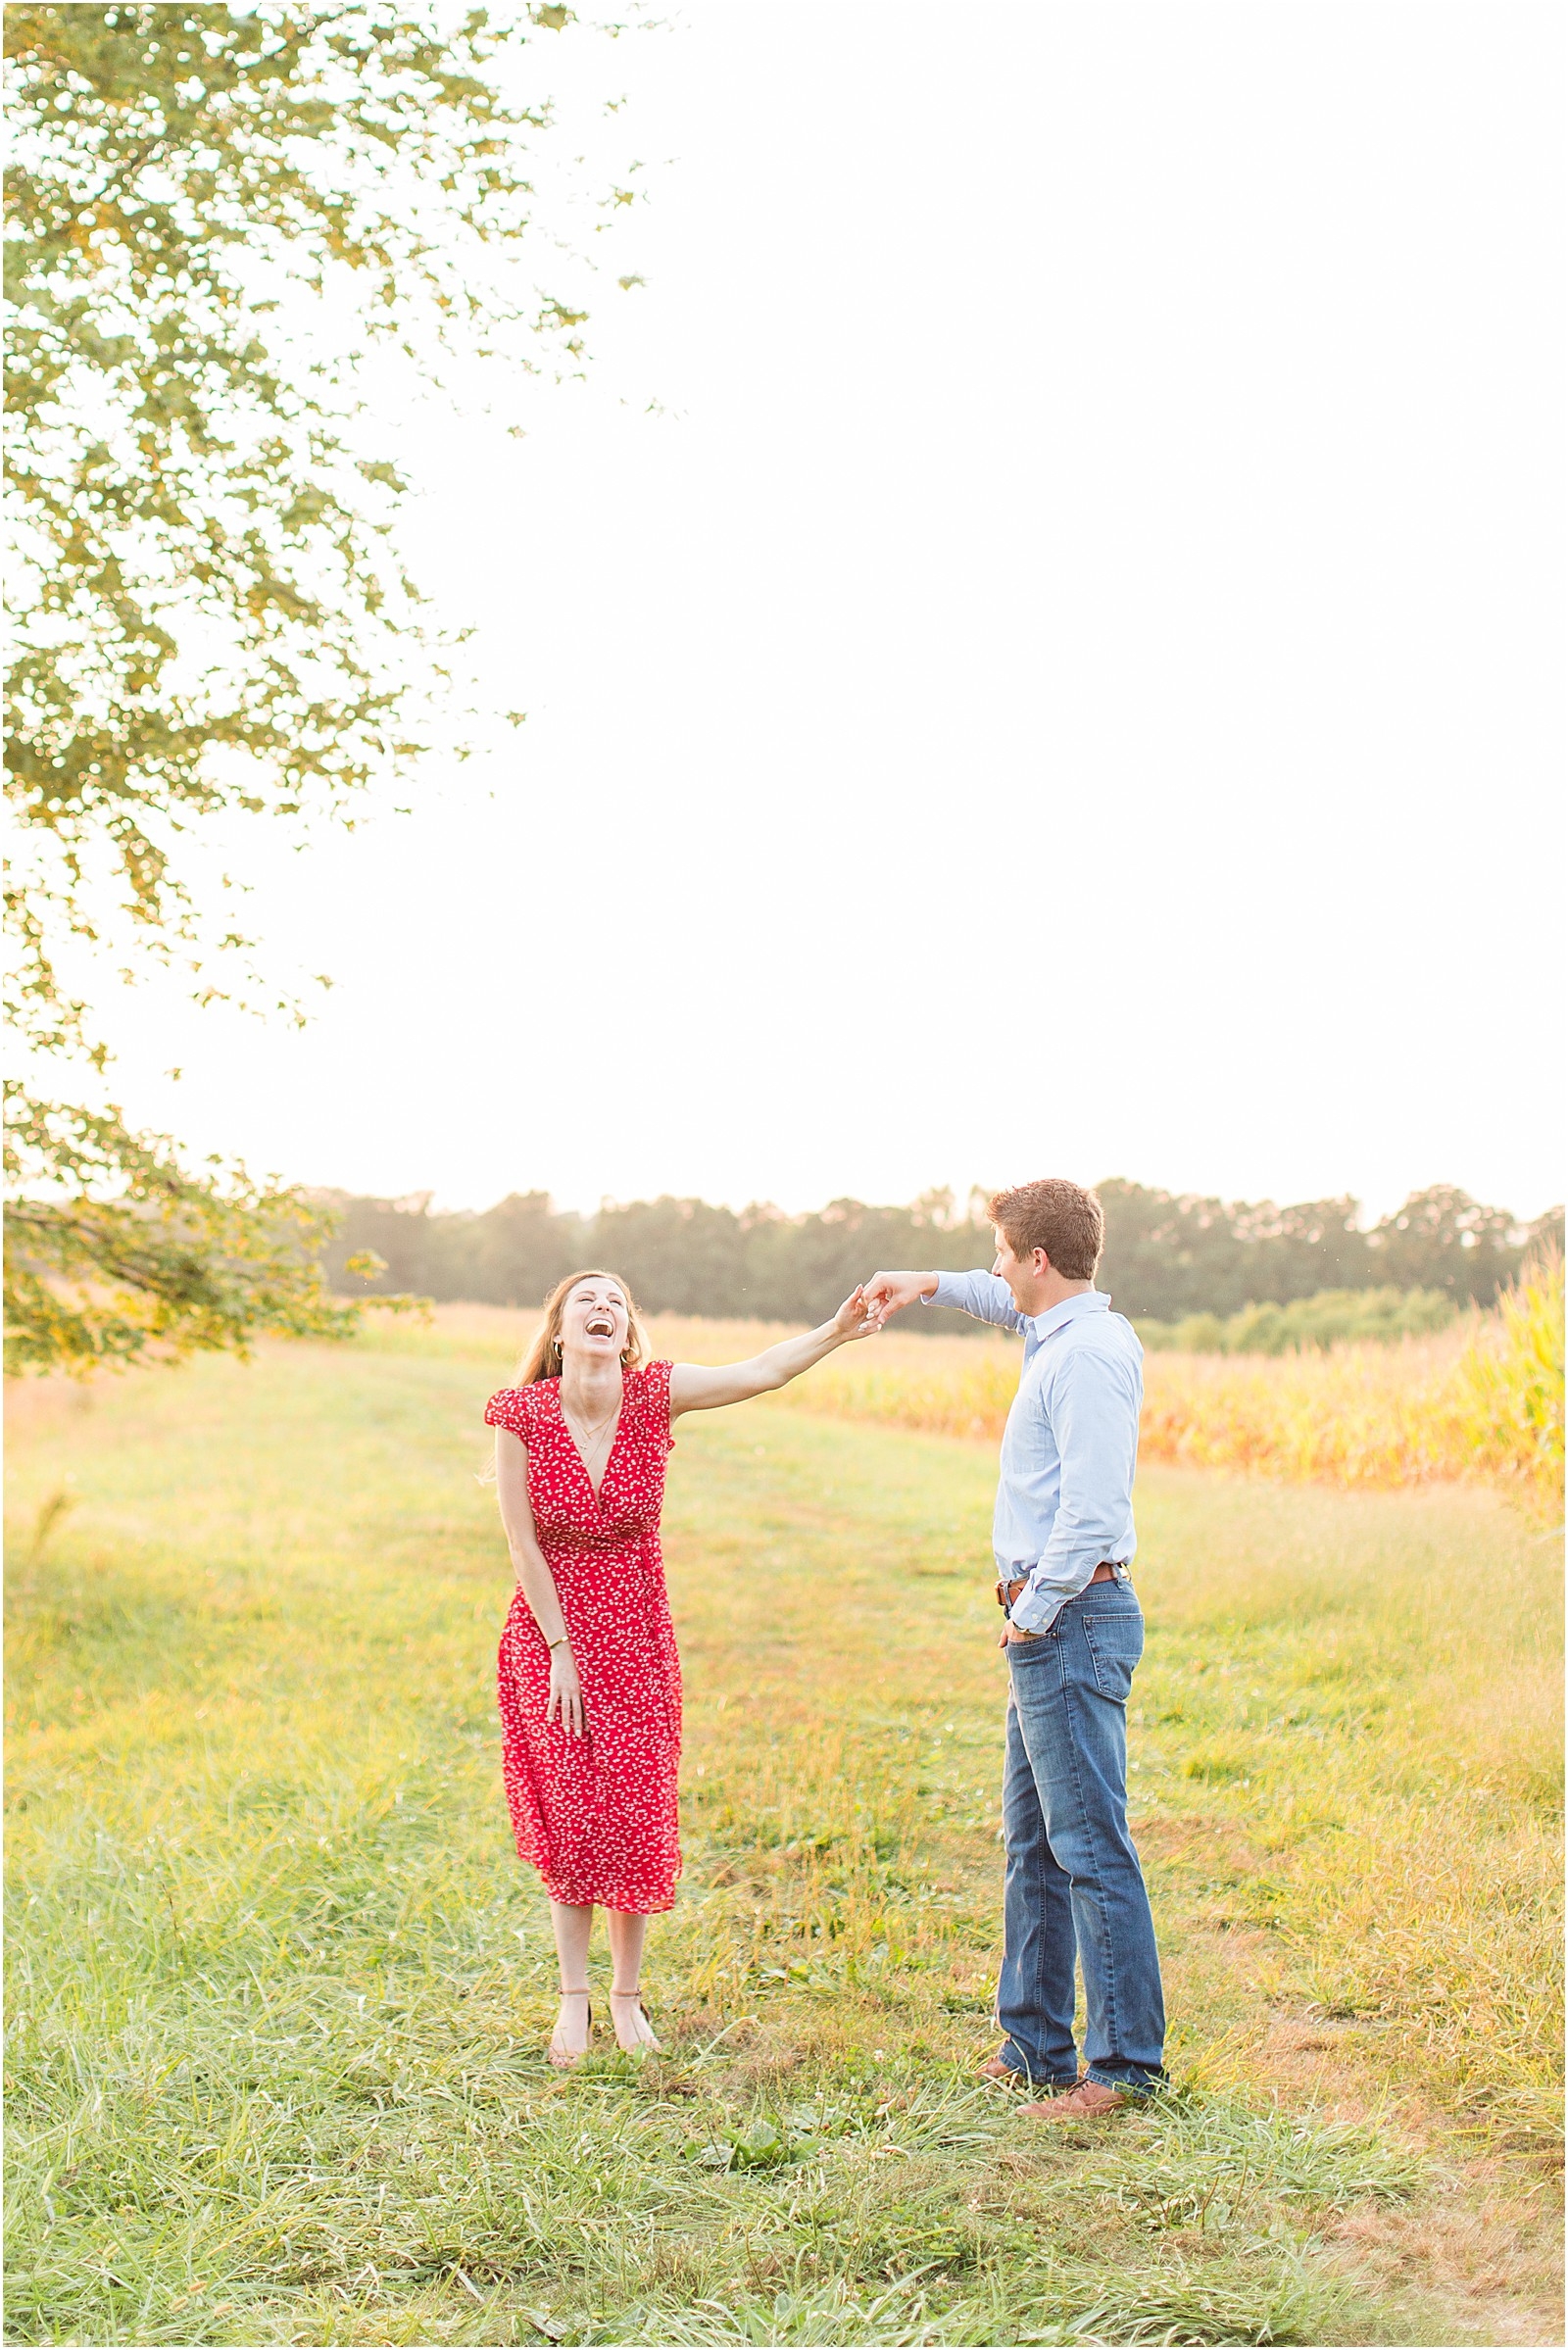 A Jasper Indiana Engagement Session | Tori and Kyle | Bret and Brandie Photography047.jpg